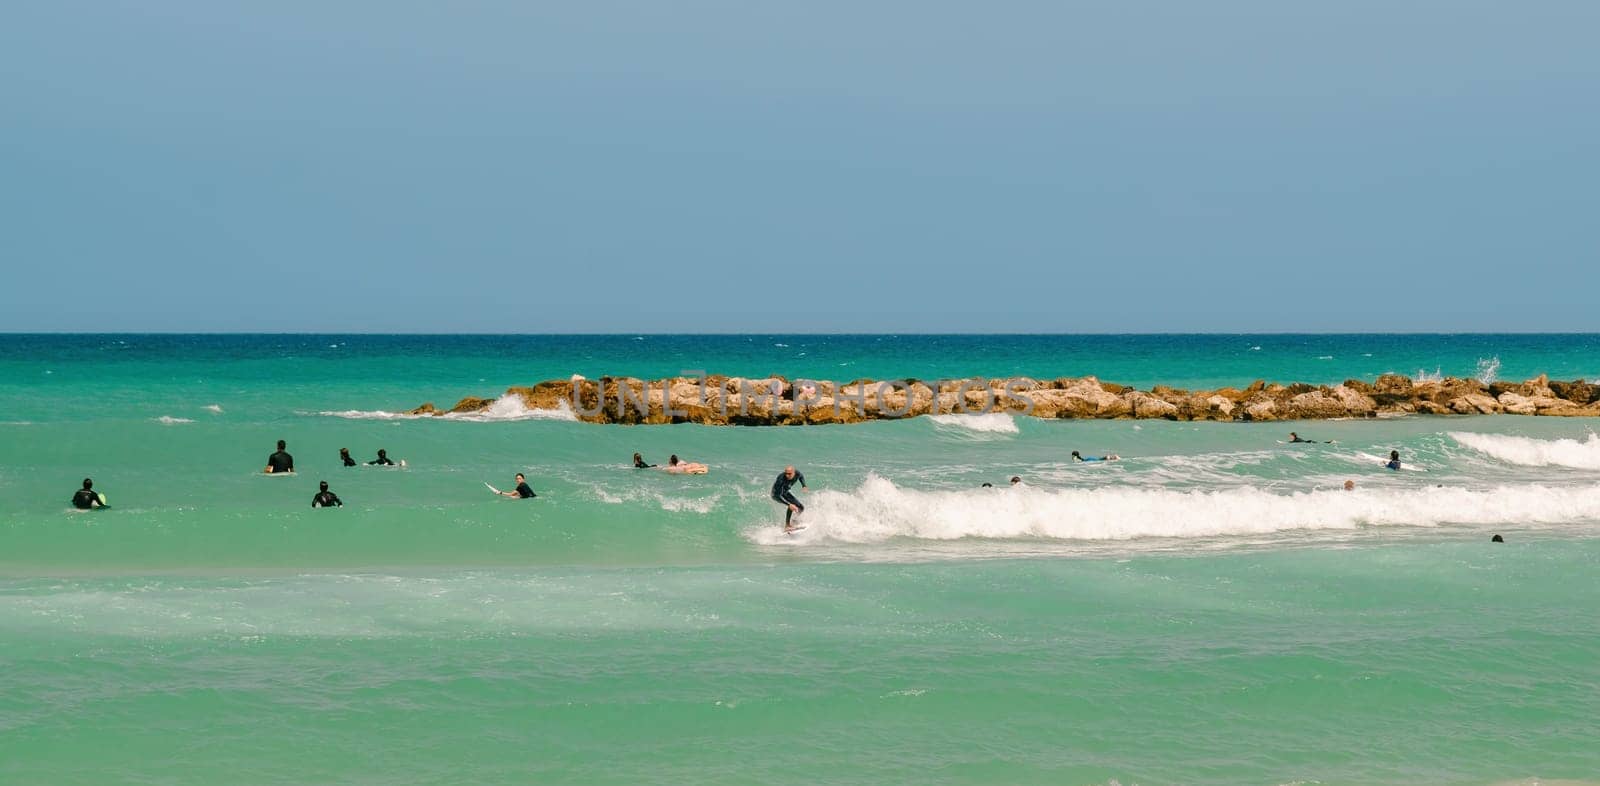 Surfing on a water board. A group of people surfers ride the waves in the ocean. Athletes in training with a coach learn to catch waves. Netanya, Israel. May 23, 2023.